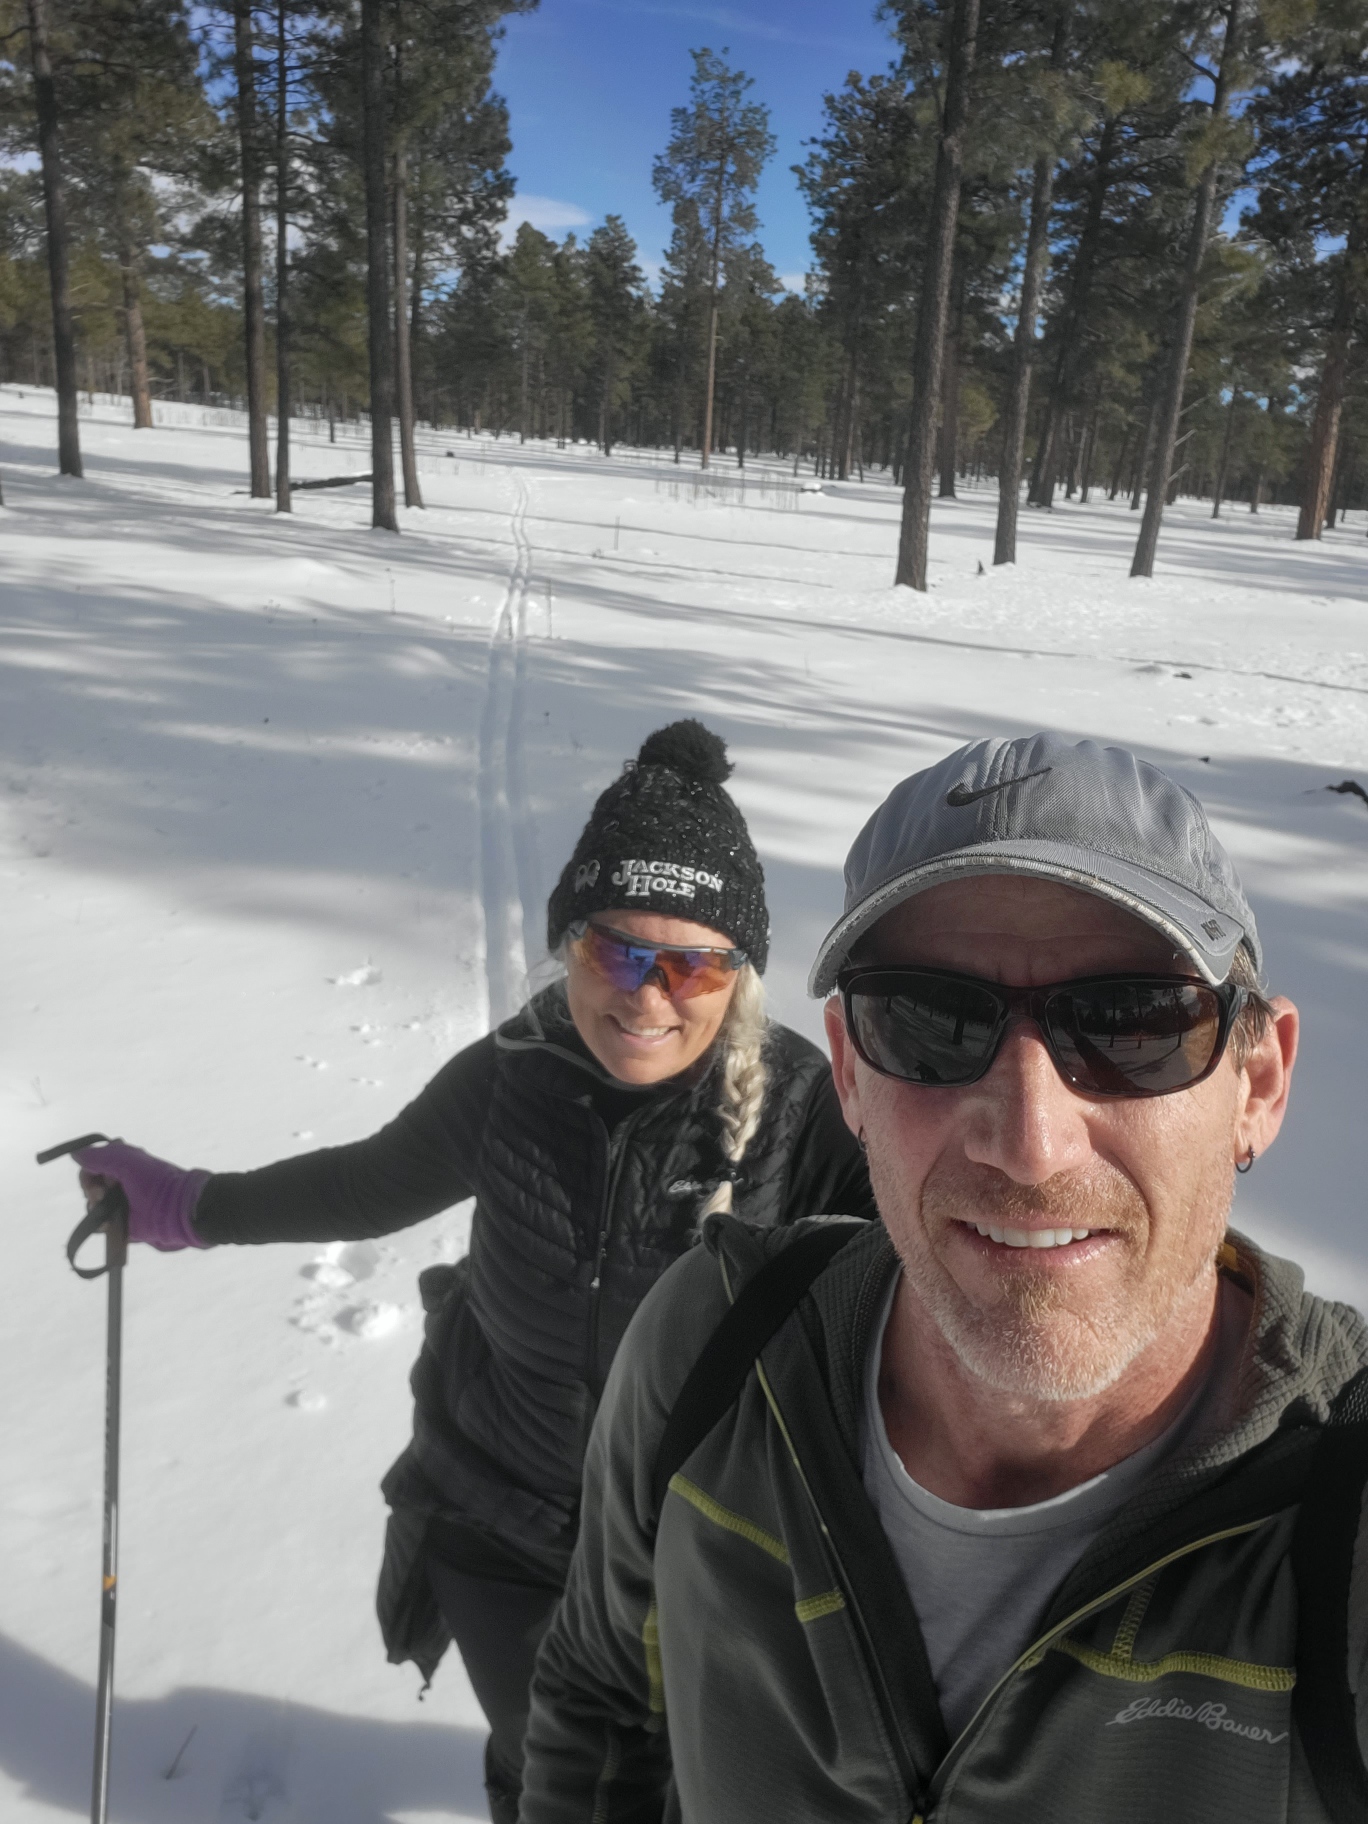 Emy Tice and her husband cross-country skiing